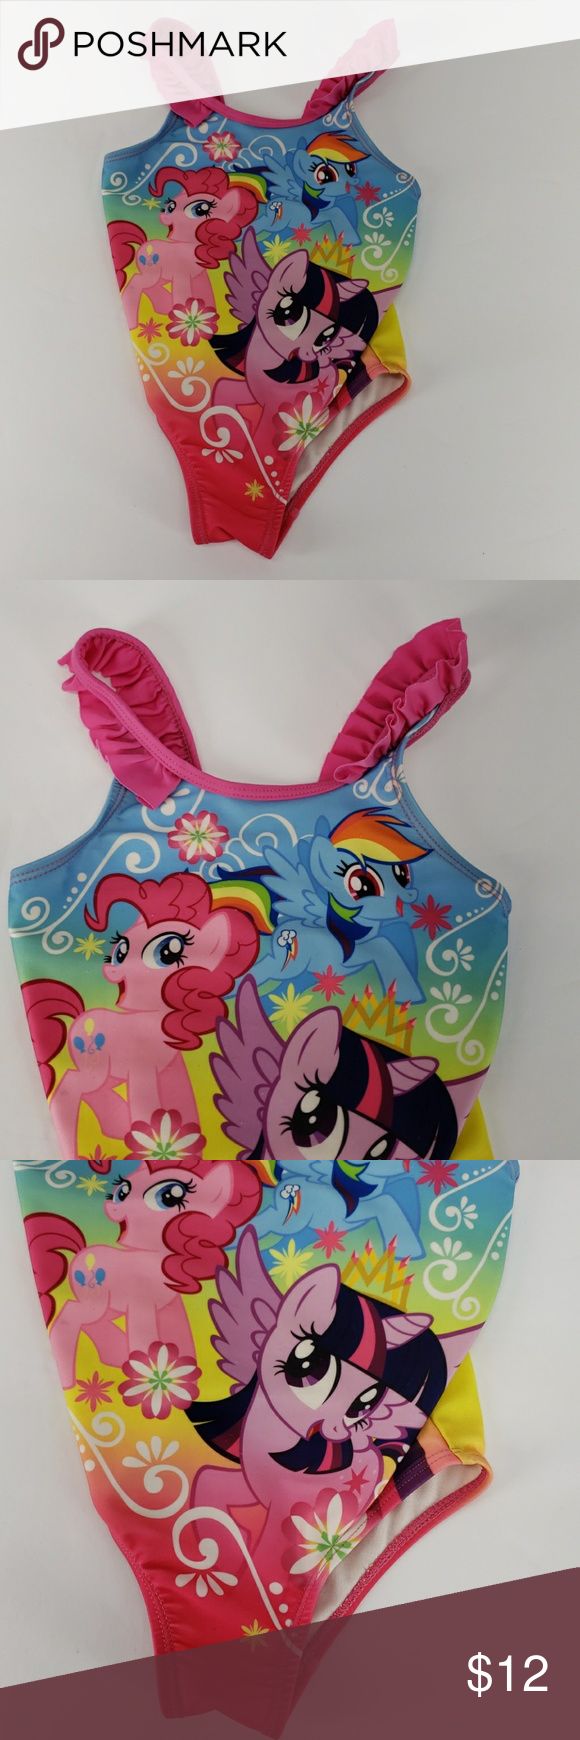 My little pony 4T one piece bathing suit My little pony 4T one piece bathing sui